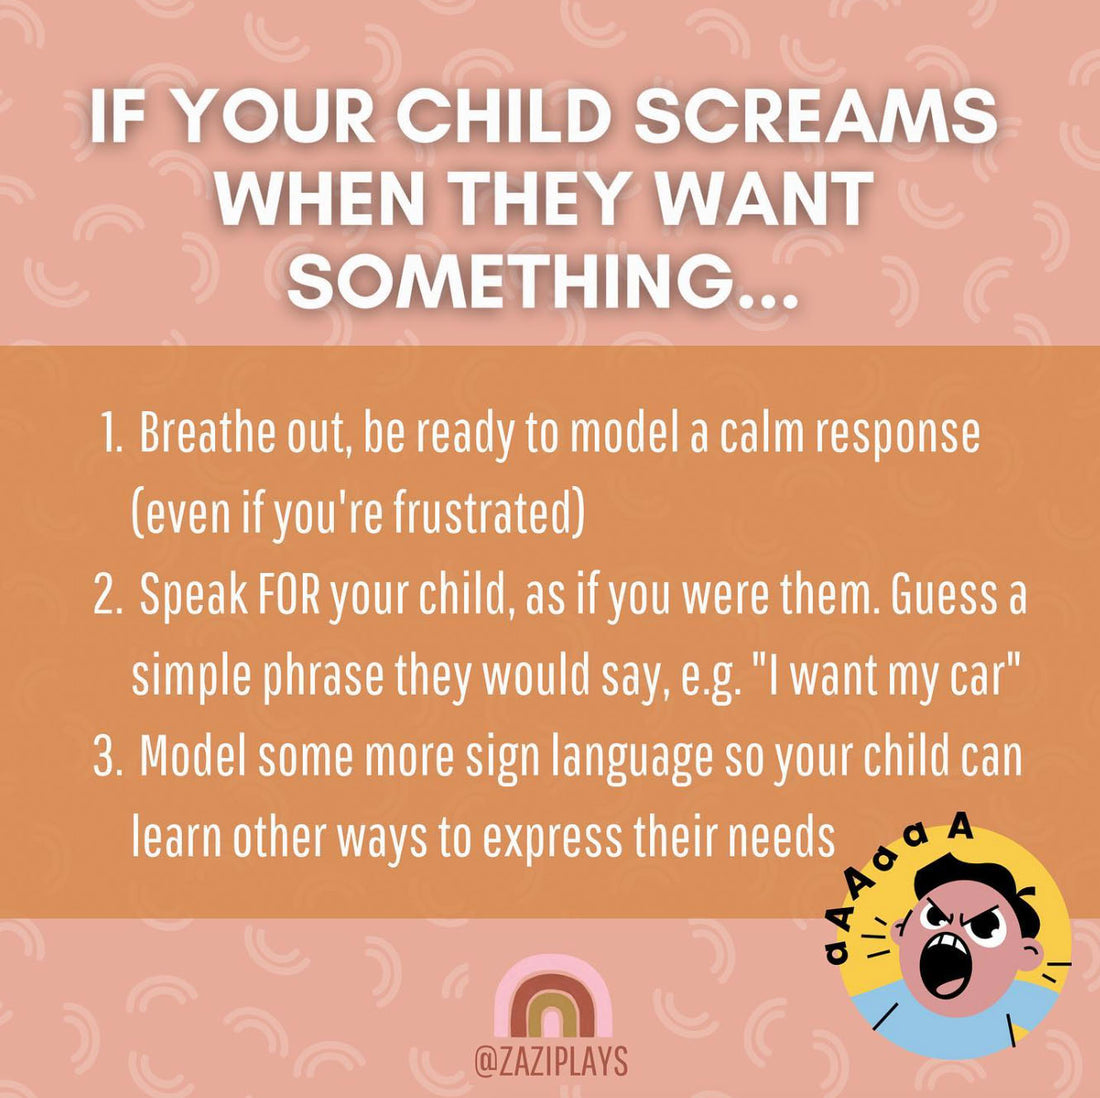 If your child screams when they want something